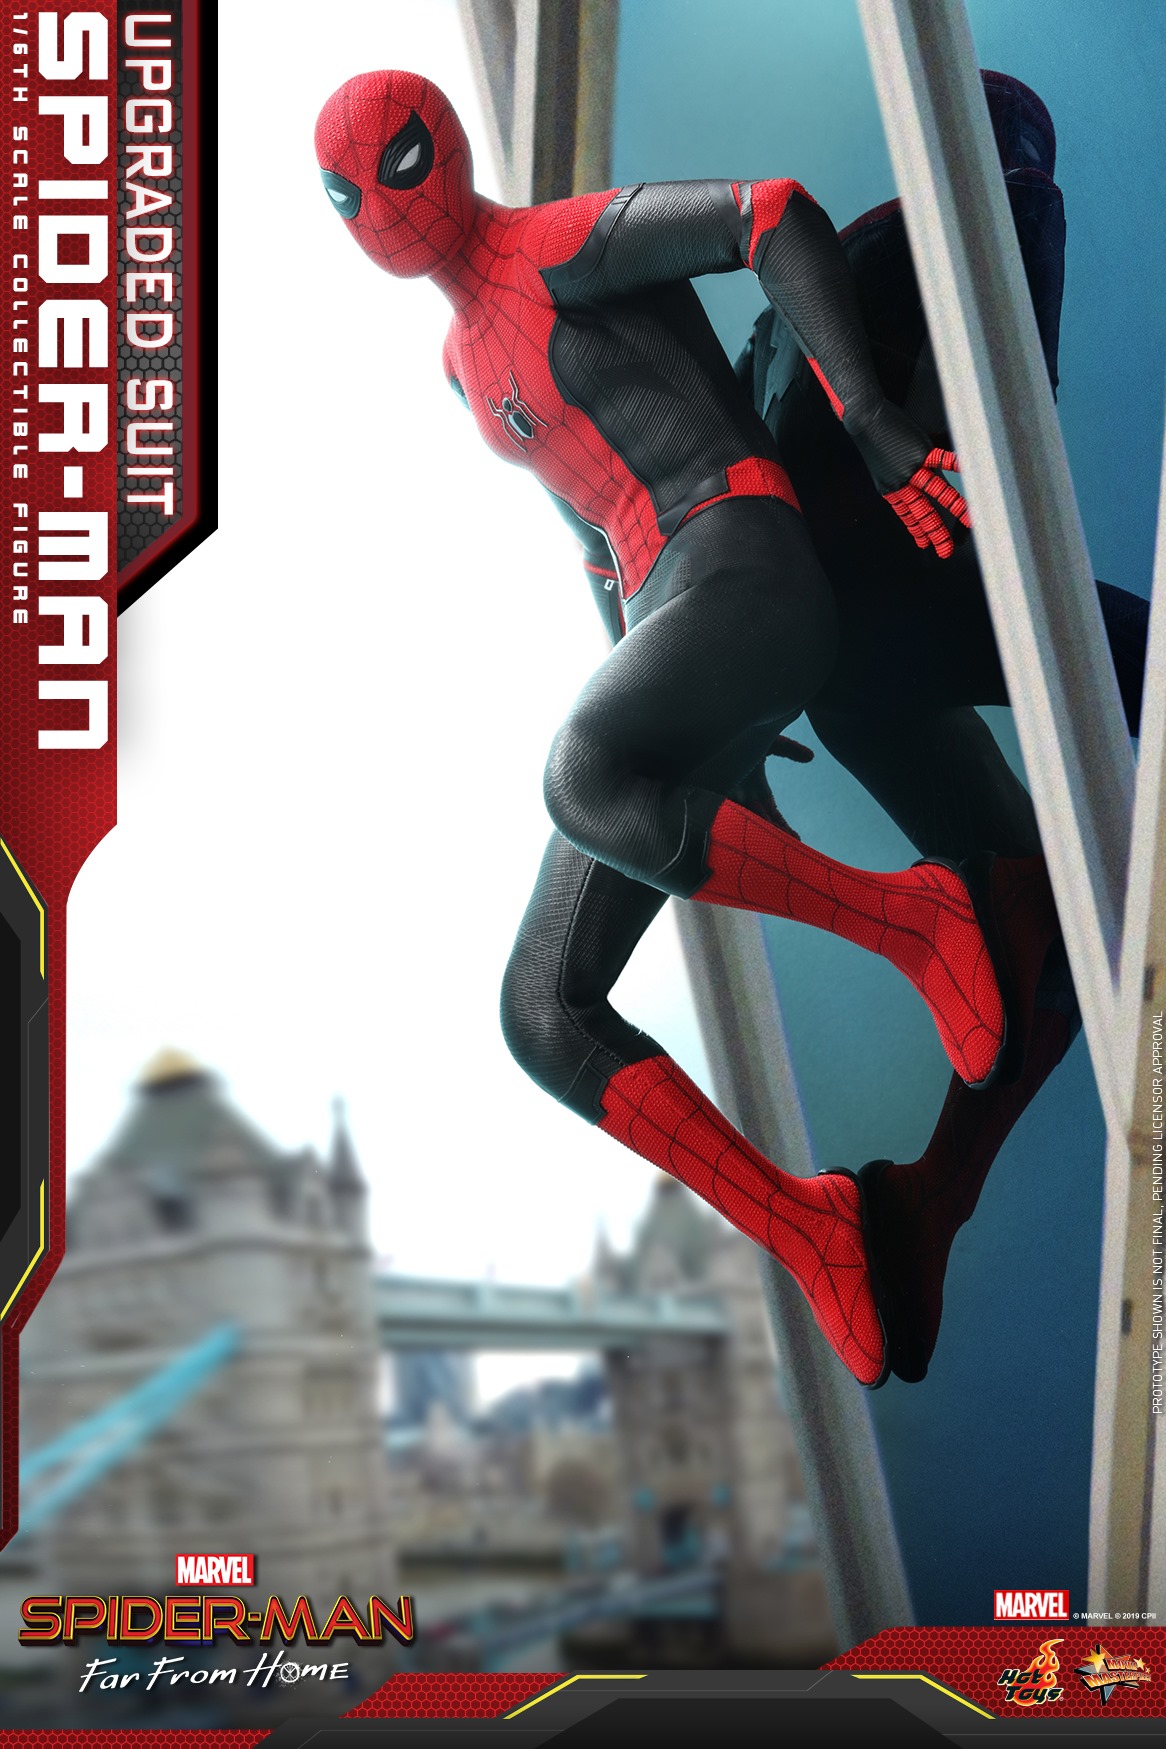 Hot Toys Upgraded Suit Spider-Man Far From Home Figure Up ...